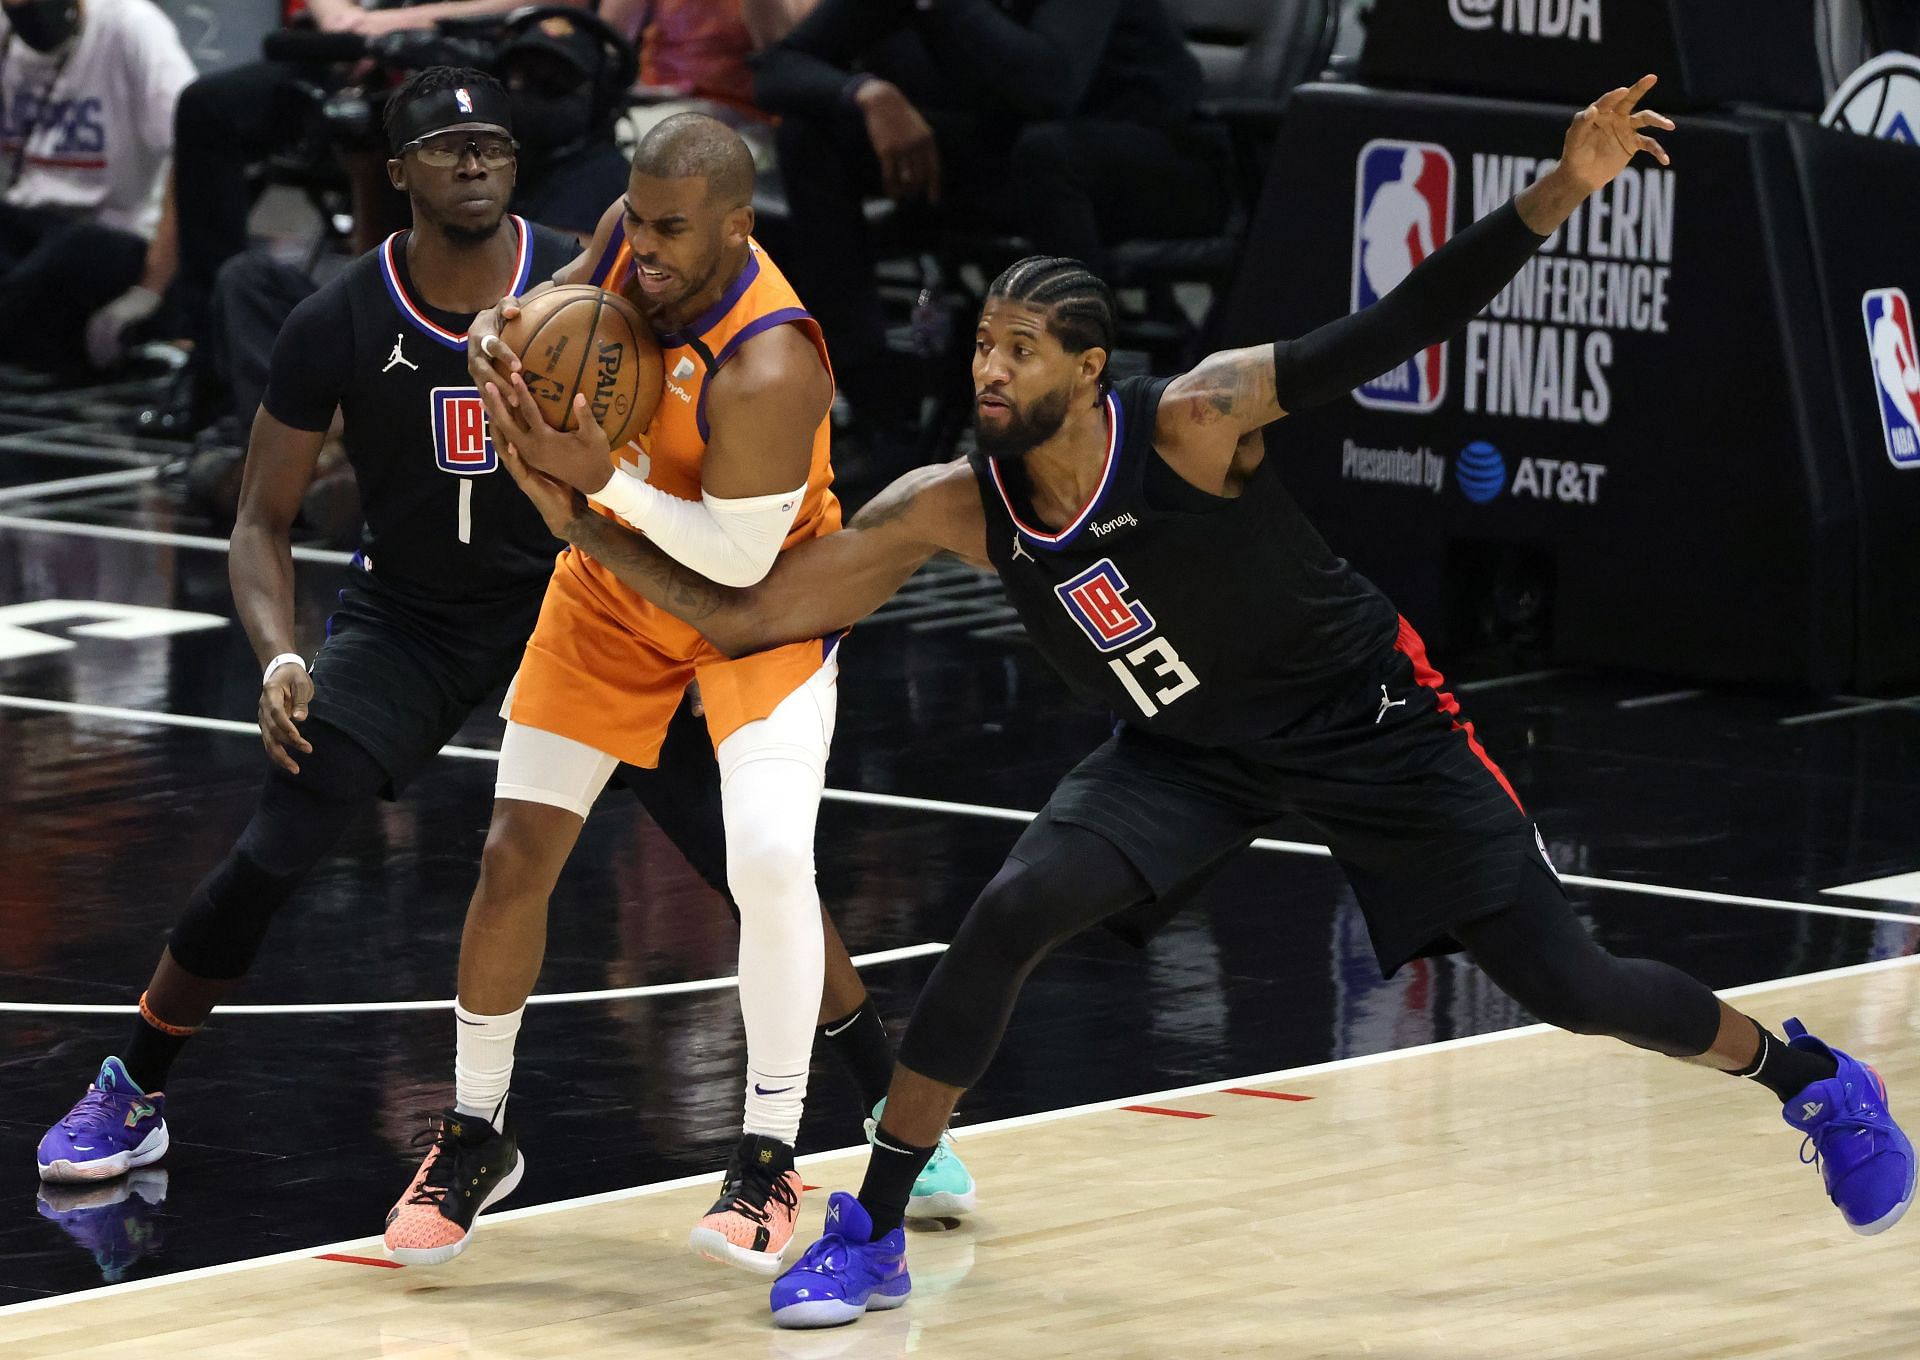 Chris Paul of the Phoenix Suns against Reggie Jackson and Paul George of the LA Clippers